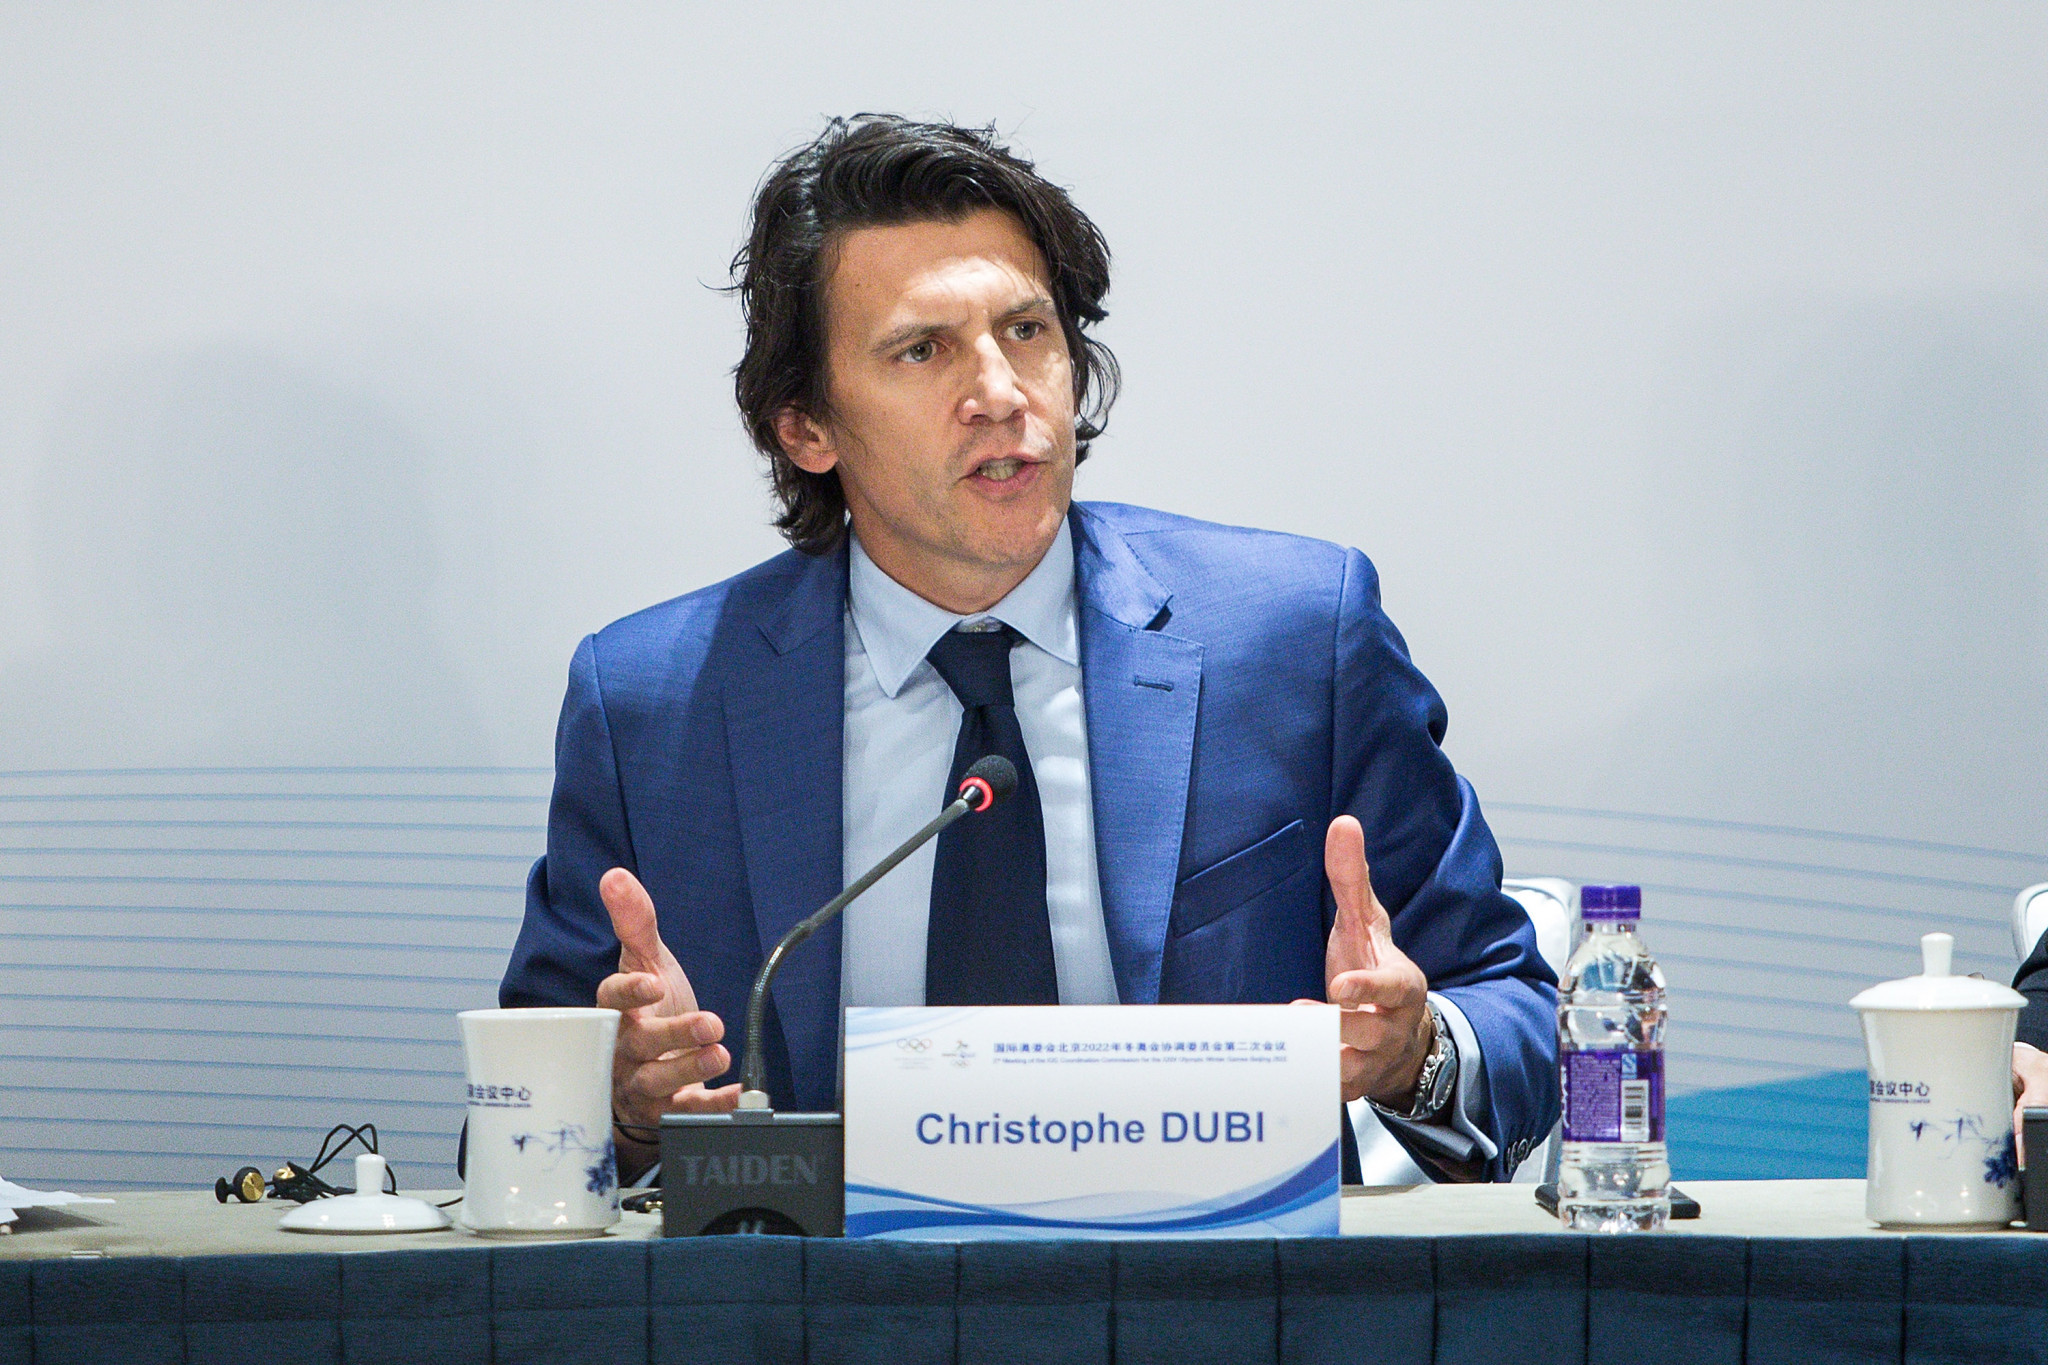 Christophe Dubi was speaking at the official de-brief of Pyeongchang 2018 ©Getty Images